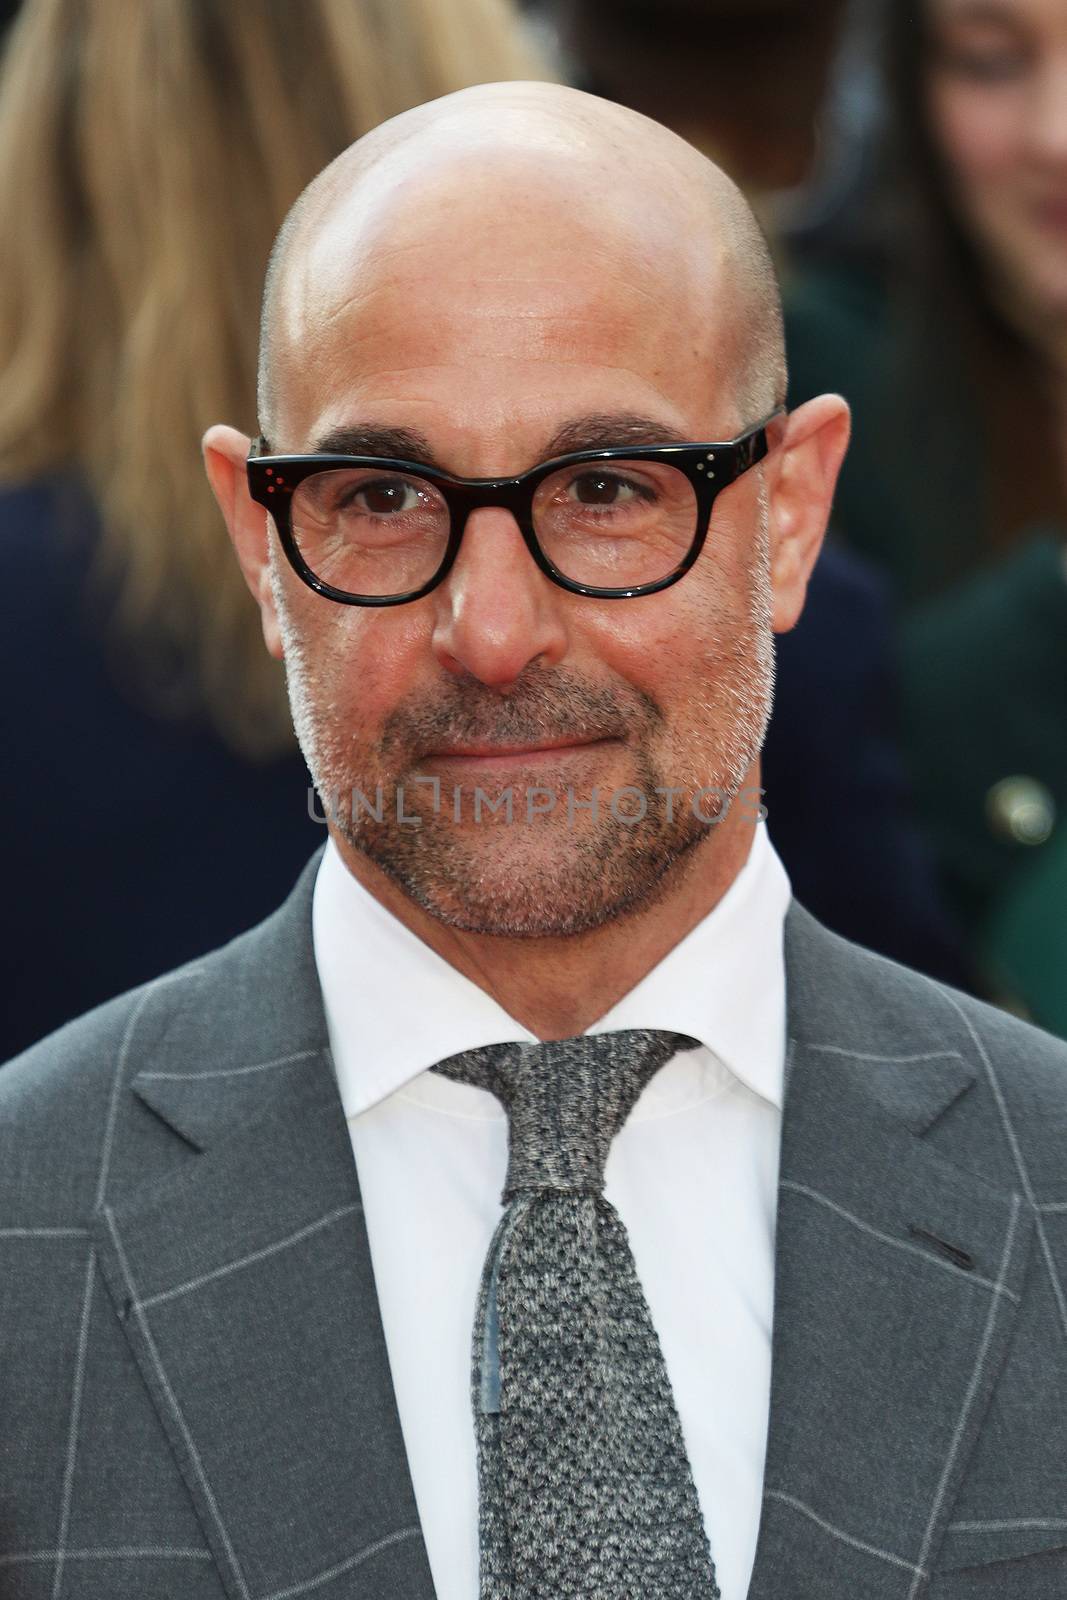 ENGLAND, London: Stanley Tucci attends the Florence Foster Jenkins premiere, on April 12, 2016, at the Odeon Leicester Square.The film stars Meryl Streep, who plays Florence Foster Jenkins, Hugh Grant, and Simon Helberg. It is based on the real life story of an heiress who wanted to become an opera singer,despite having a horrible voice. 